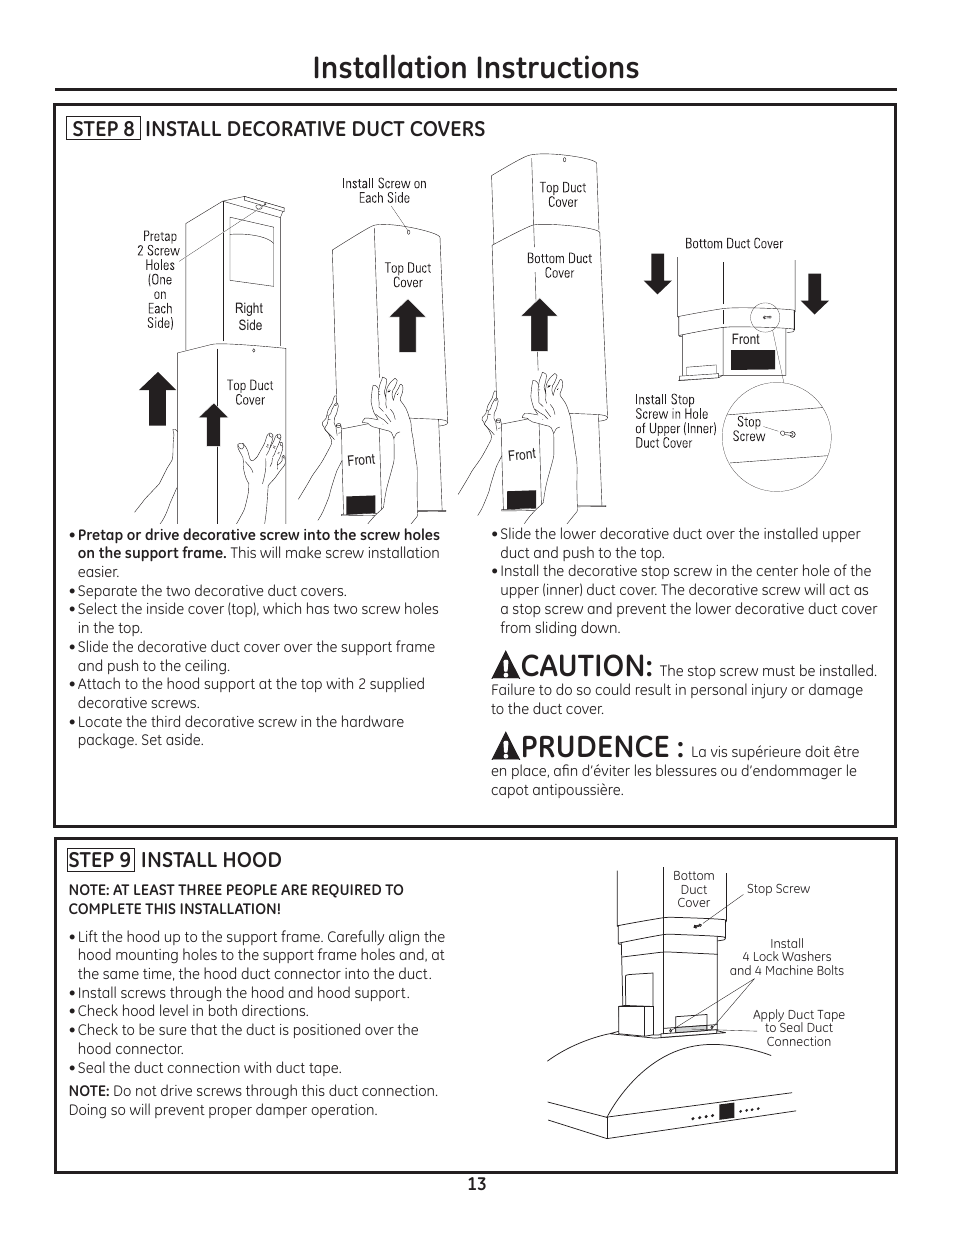 Installation instructions, Caution, Prudence | Step 8 install decorative duct covers, Step 9 install hood | GE ZV1050SFSS User Manual | Page 13 / 16